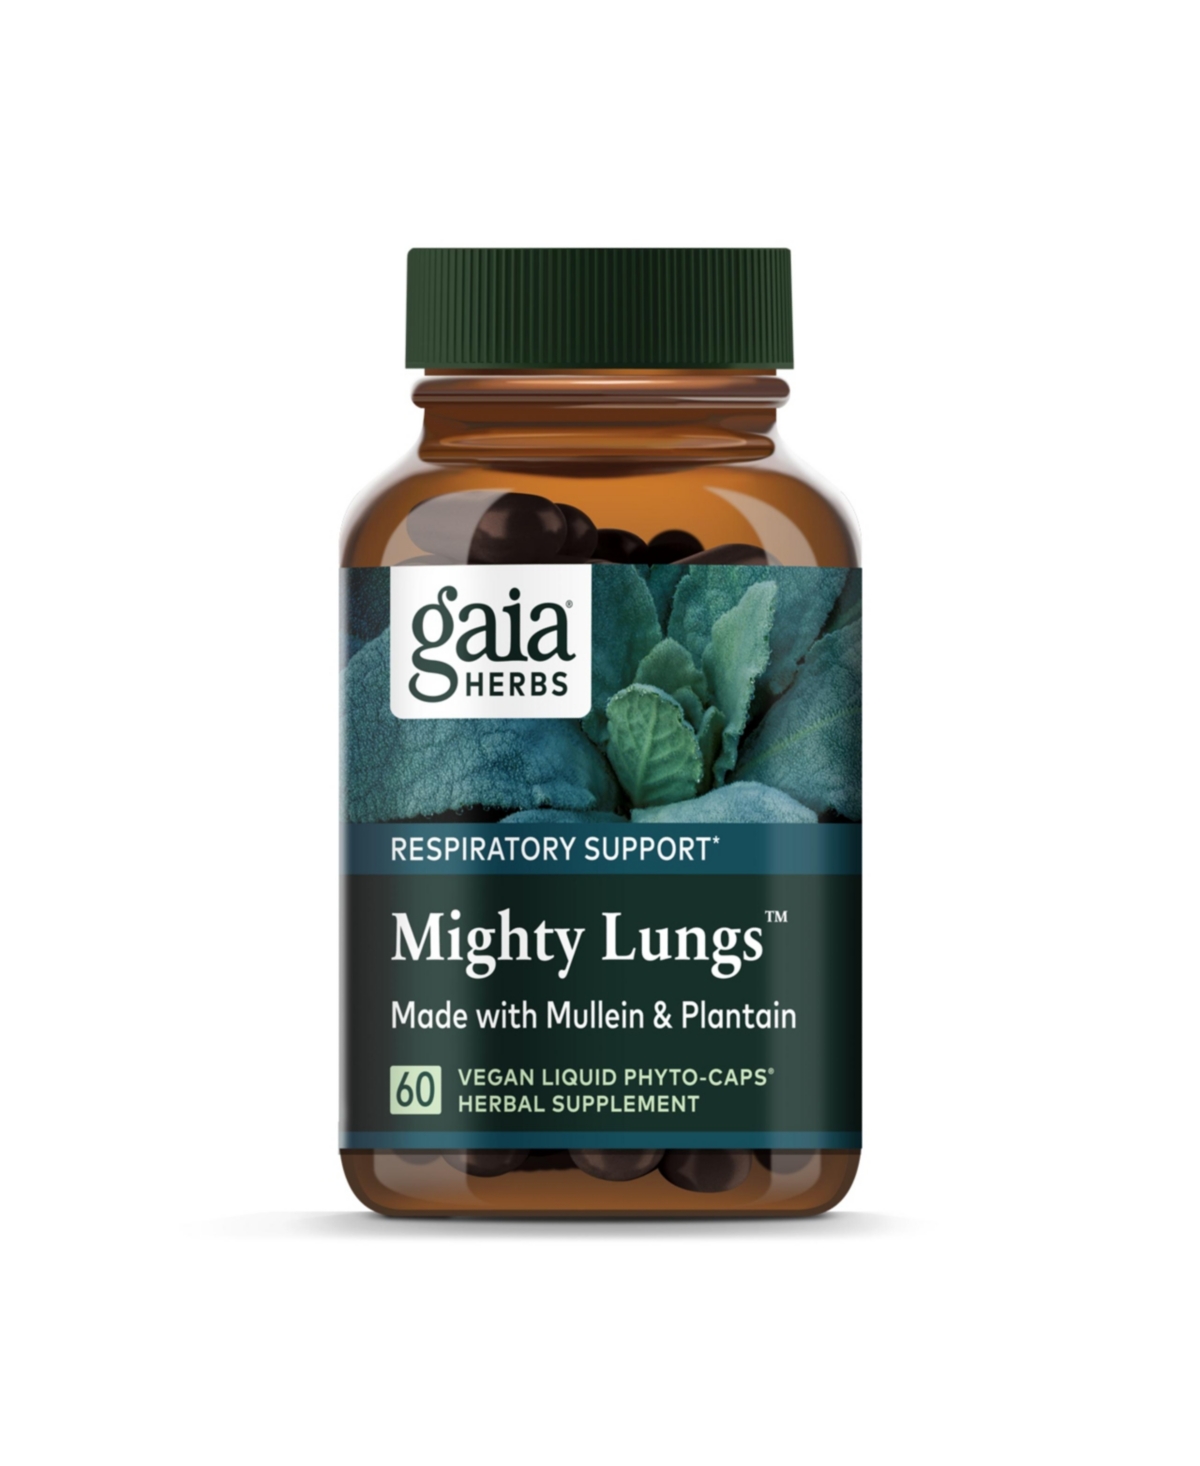 Mighty Lungs - Lung Support Supplement to Help Maintain Overall Lung & Respiratory Health - With Mullein, Plantain, Schisandra & Elecampane